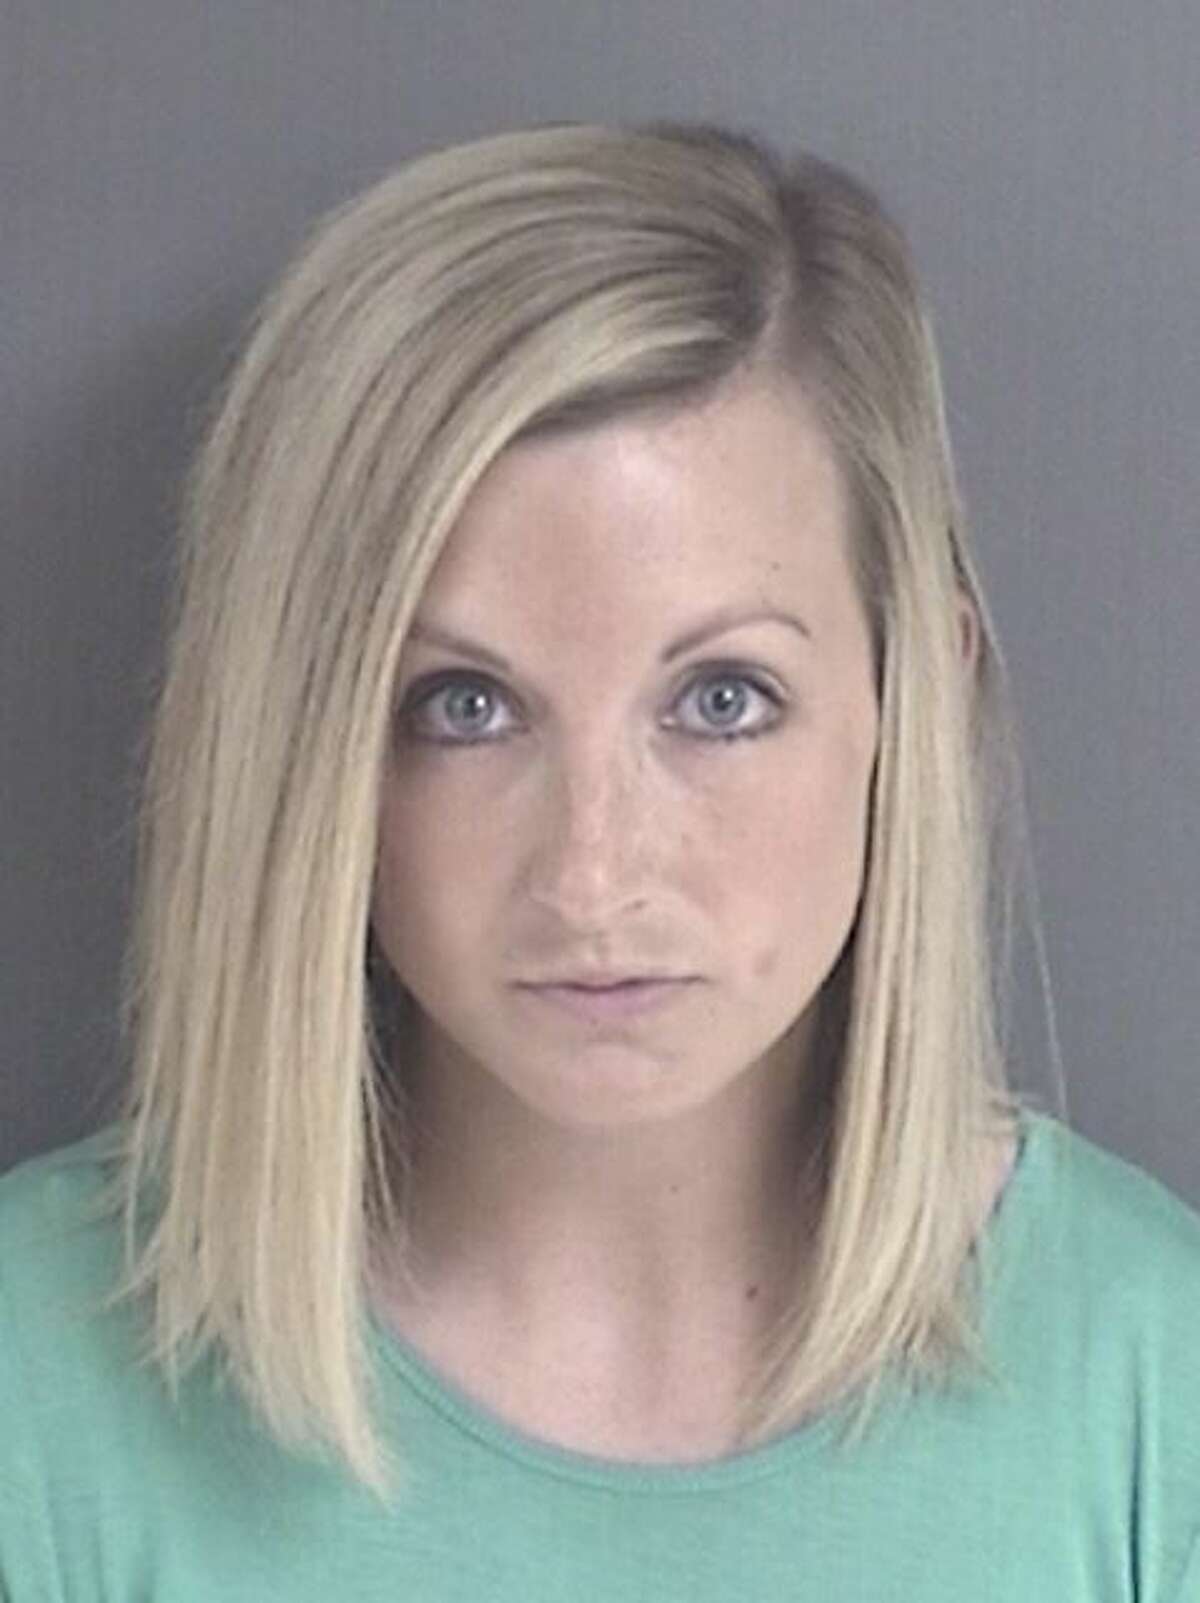 High School Nudes Porn - Police: East Texas middle school teacher sent nude photos to 14-year-old  student on Snapchat